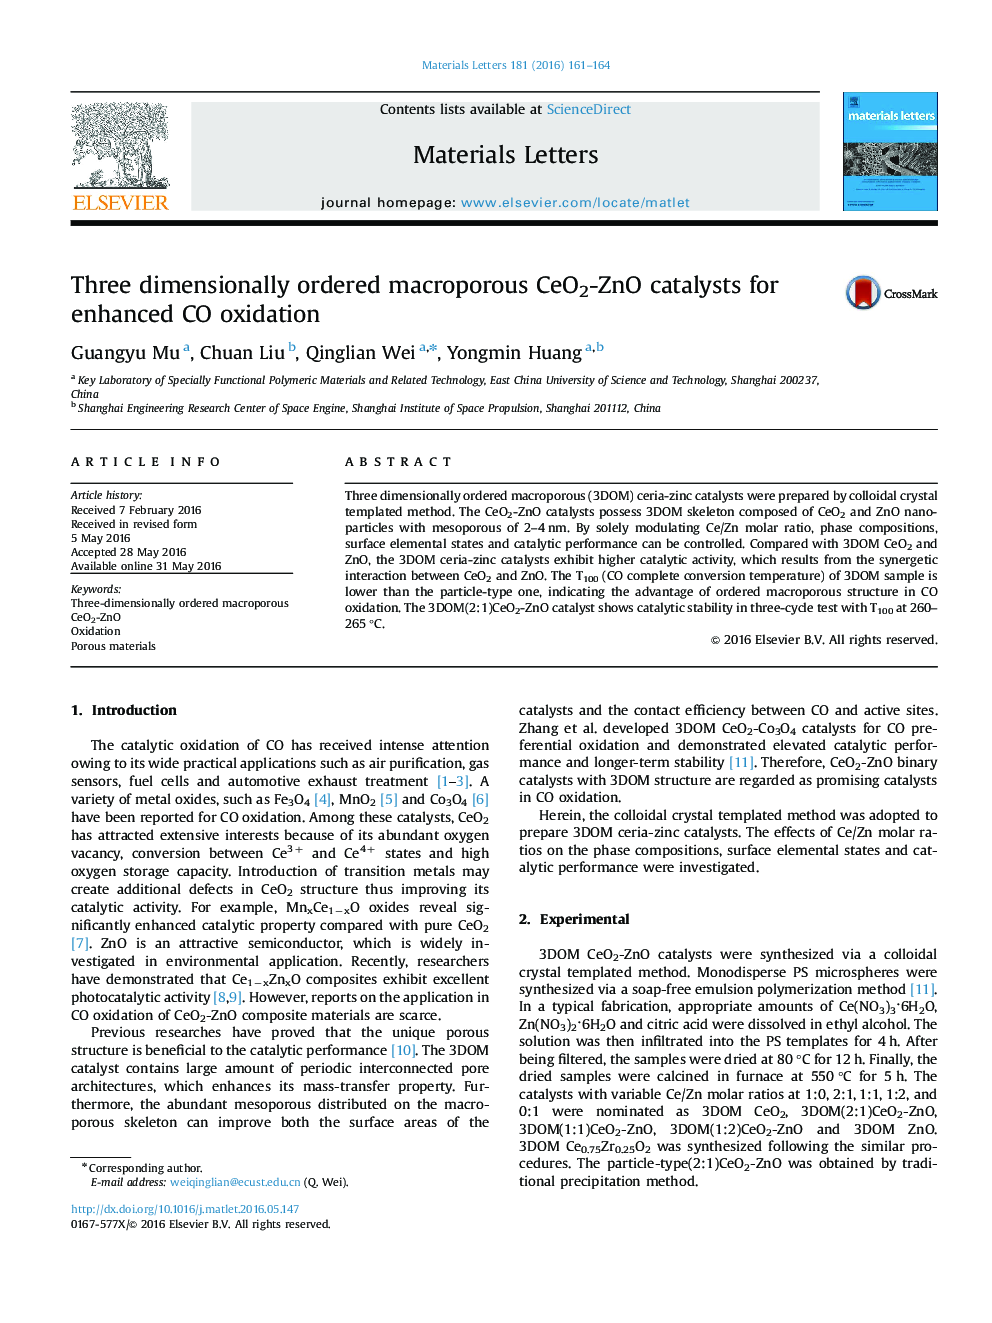 Three dimensionally ordered macroporous CeO2-ZnO catalysts for enhanced CO oxidation